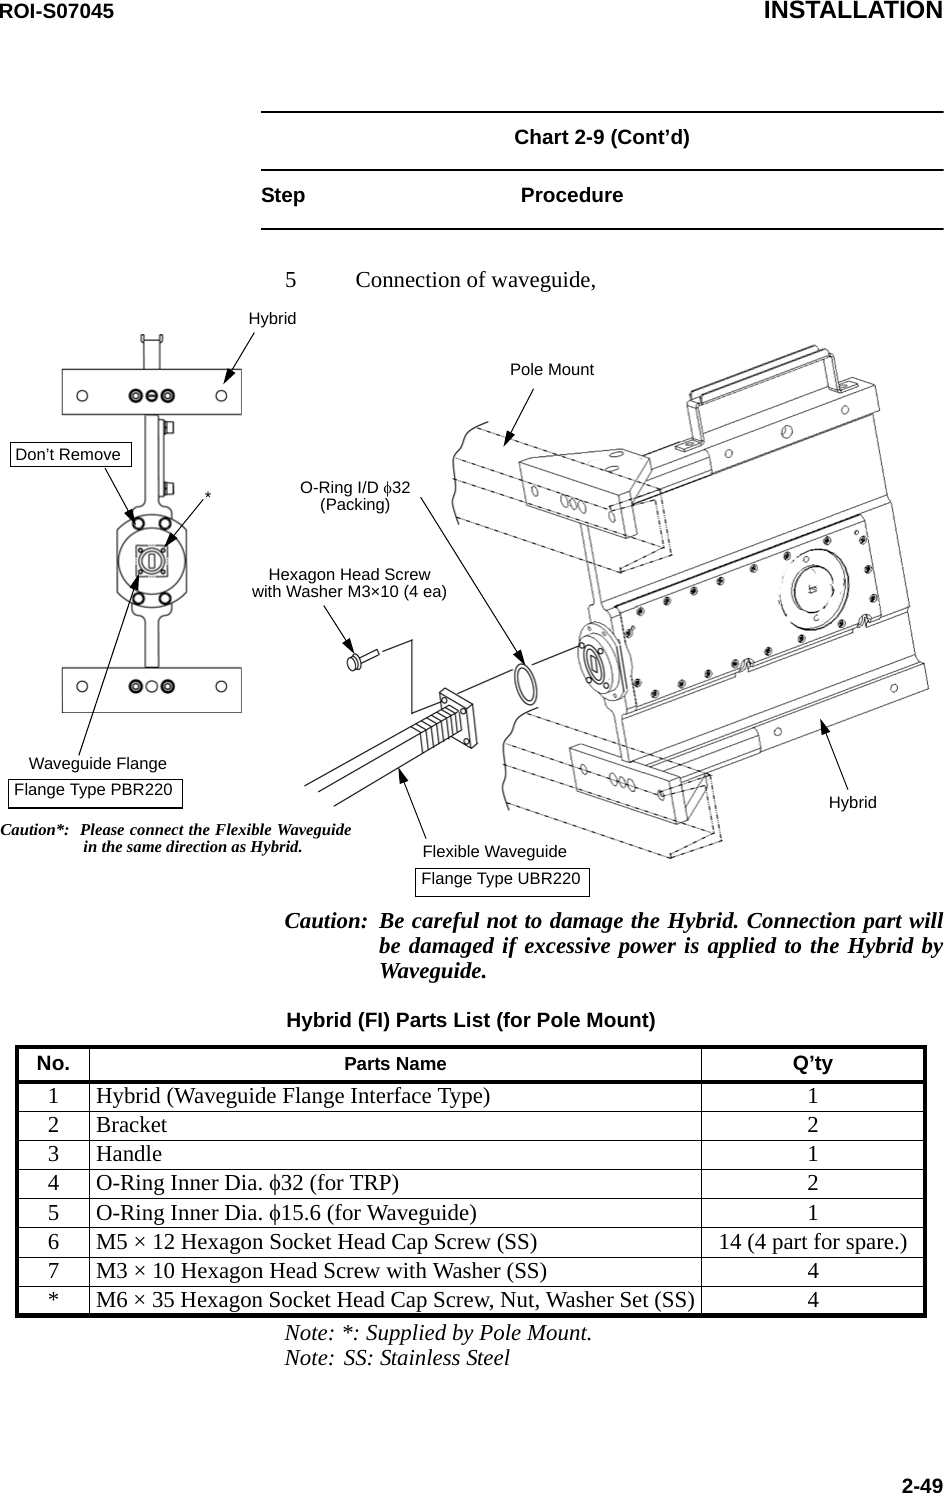 ROI-S07045 INSTALLATION2-49Chart 2-9 (Cont’d) Step Procedure5 Connection of waveguide,Caution: Be careful not to damage the Hybrid. Connection part willbe damaged if excessive power is applied to the Hybrid byWaveguide.Note: *: Supplied by Pole Mount.Note: SS: Stainless SteelHybridFlexible WaveguideFlange Type UBR220Pole MountO-Ring I/D φ32(Packing)Hexagon Head Screwwith Washer M3×10 (4 ea)HybridWaveguide FlangeFlange Type PBR220Don’t Remove*Caution*: Please connect the Flexible Waveguidein the same direction as Hybrid.Hybrid (FI) Parts List (for Pole Mount)No. Parts Name Q’ty1 Hybrid (Waveguide Flange Interface Type) 12Bracket 23Handle 14 O-Ring Inner Dia. φ32 (for TRP) 25 O-Ring Inner Dia. φ15.6 (for Waveguide) 16 M5 × 12 Hexagon Socket Head Cap Screw (SS) 14 (4 part for spare.)7 M3 × 10 Hexagon Head Screw with Washer (SS) 4* M6 × 35 Hexagon Socket Head Cap Screw, Nut, Washer Set (SS) 4